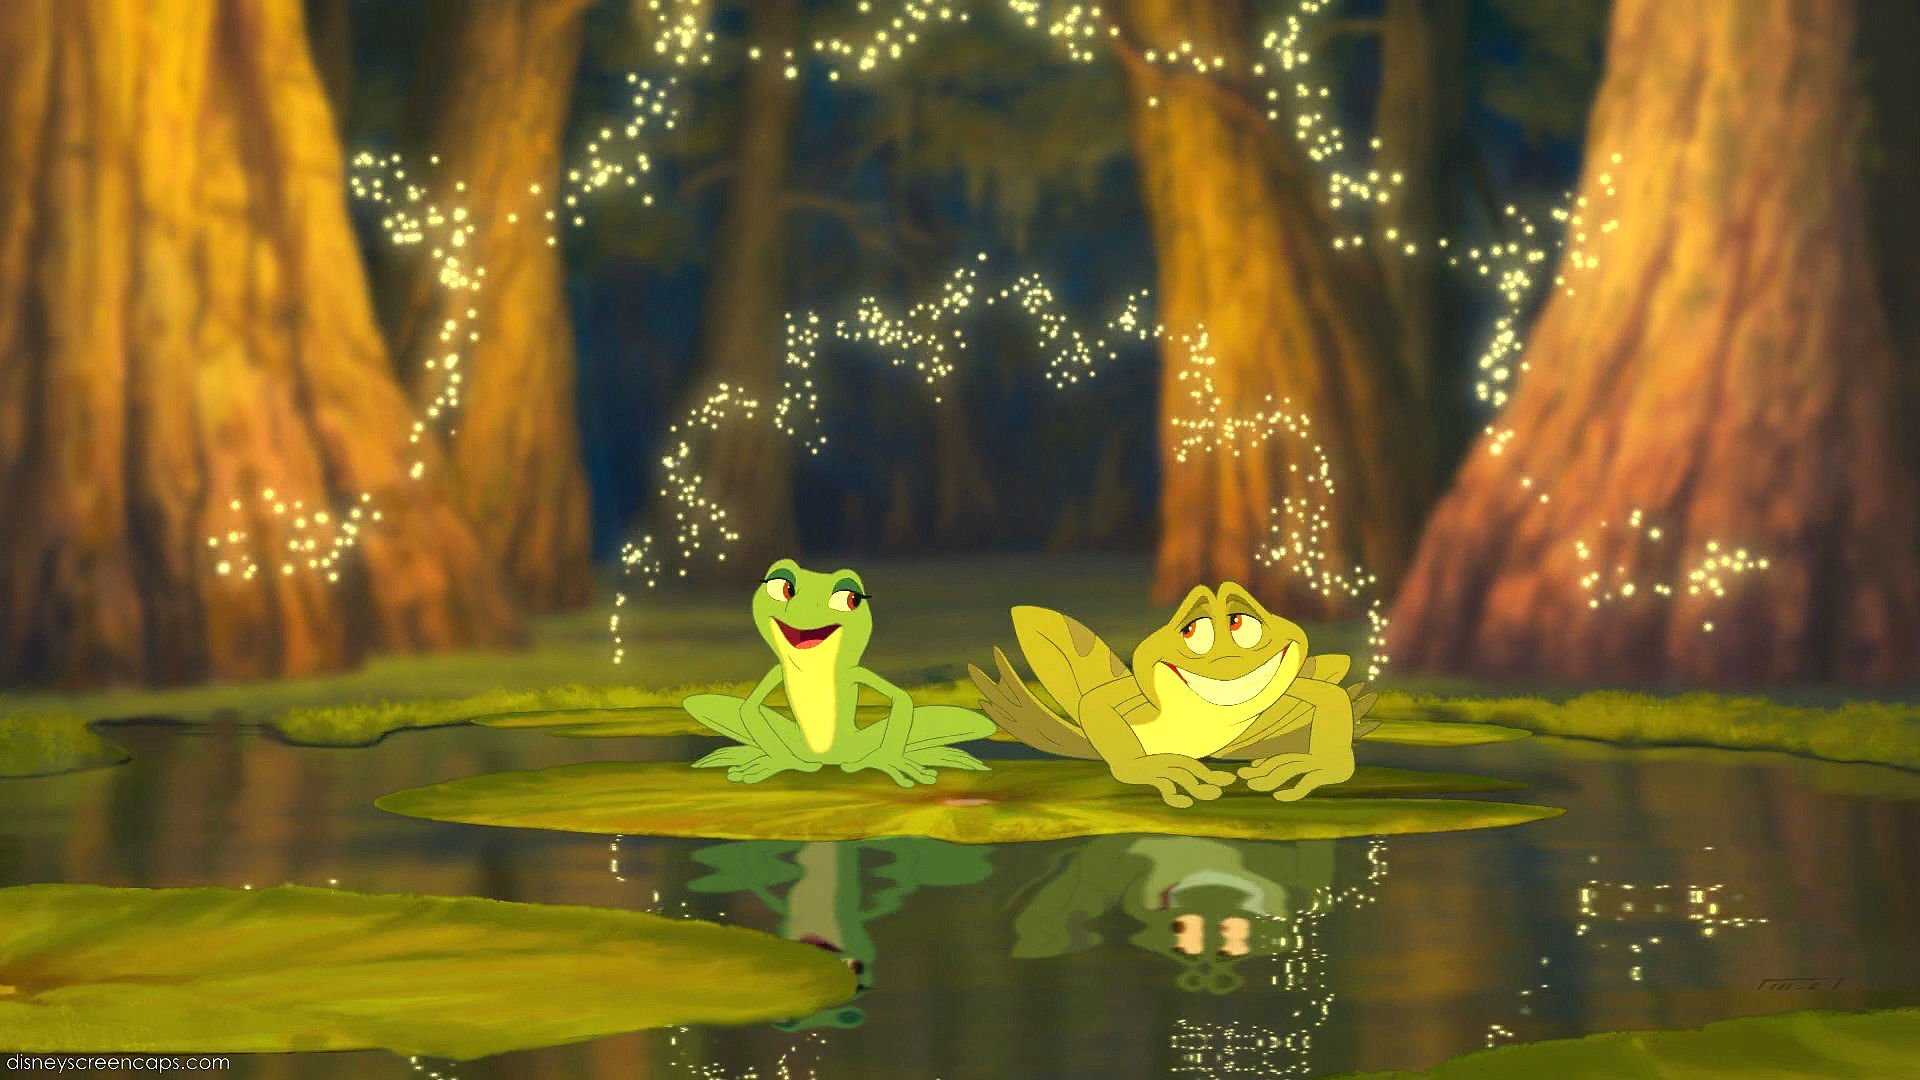 1920x1080 princess, And, The, Frog, Animation, Disney, Family, Fantasy, Romance, Romantic, Musical, 1princessfrog Wallpapers HD / Desktop and Mobile Backgrounds